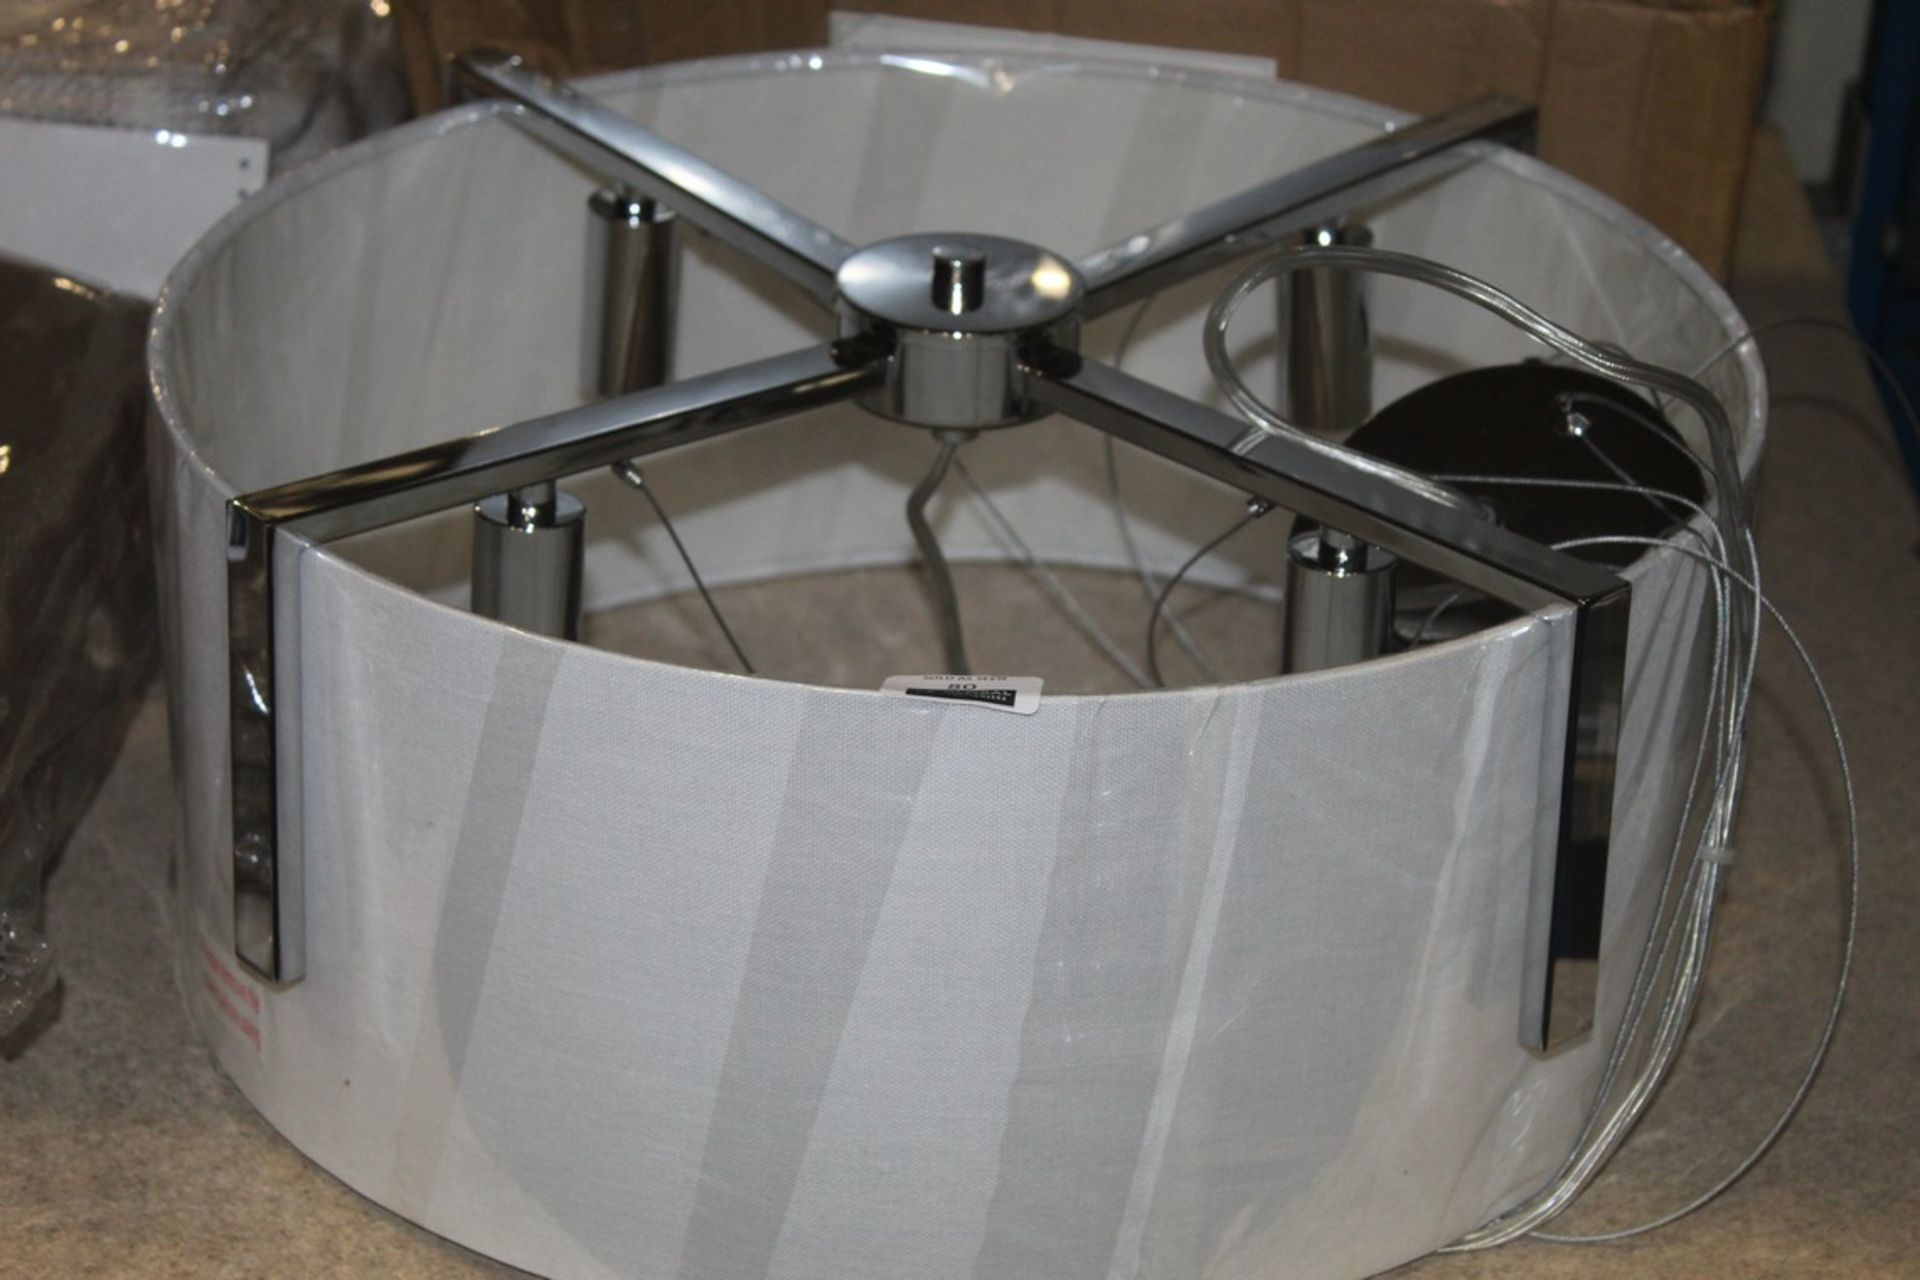 Boxed Stainless Steel 4 Light Chrome Fabric Shade and Chandelier style Ceiling Light RRP £80 (